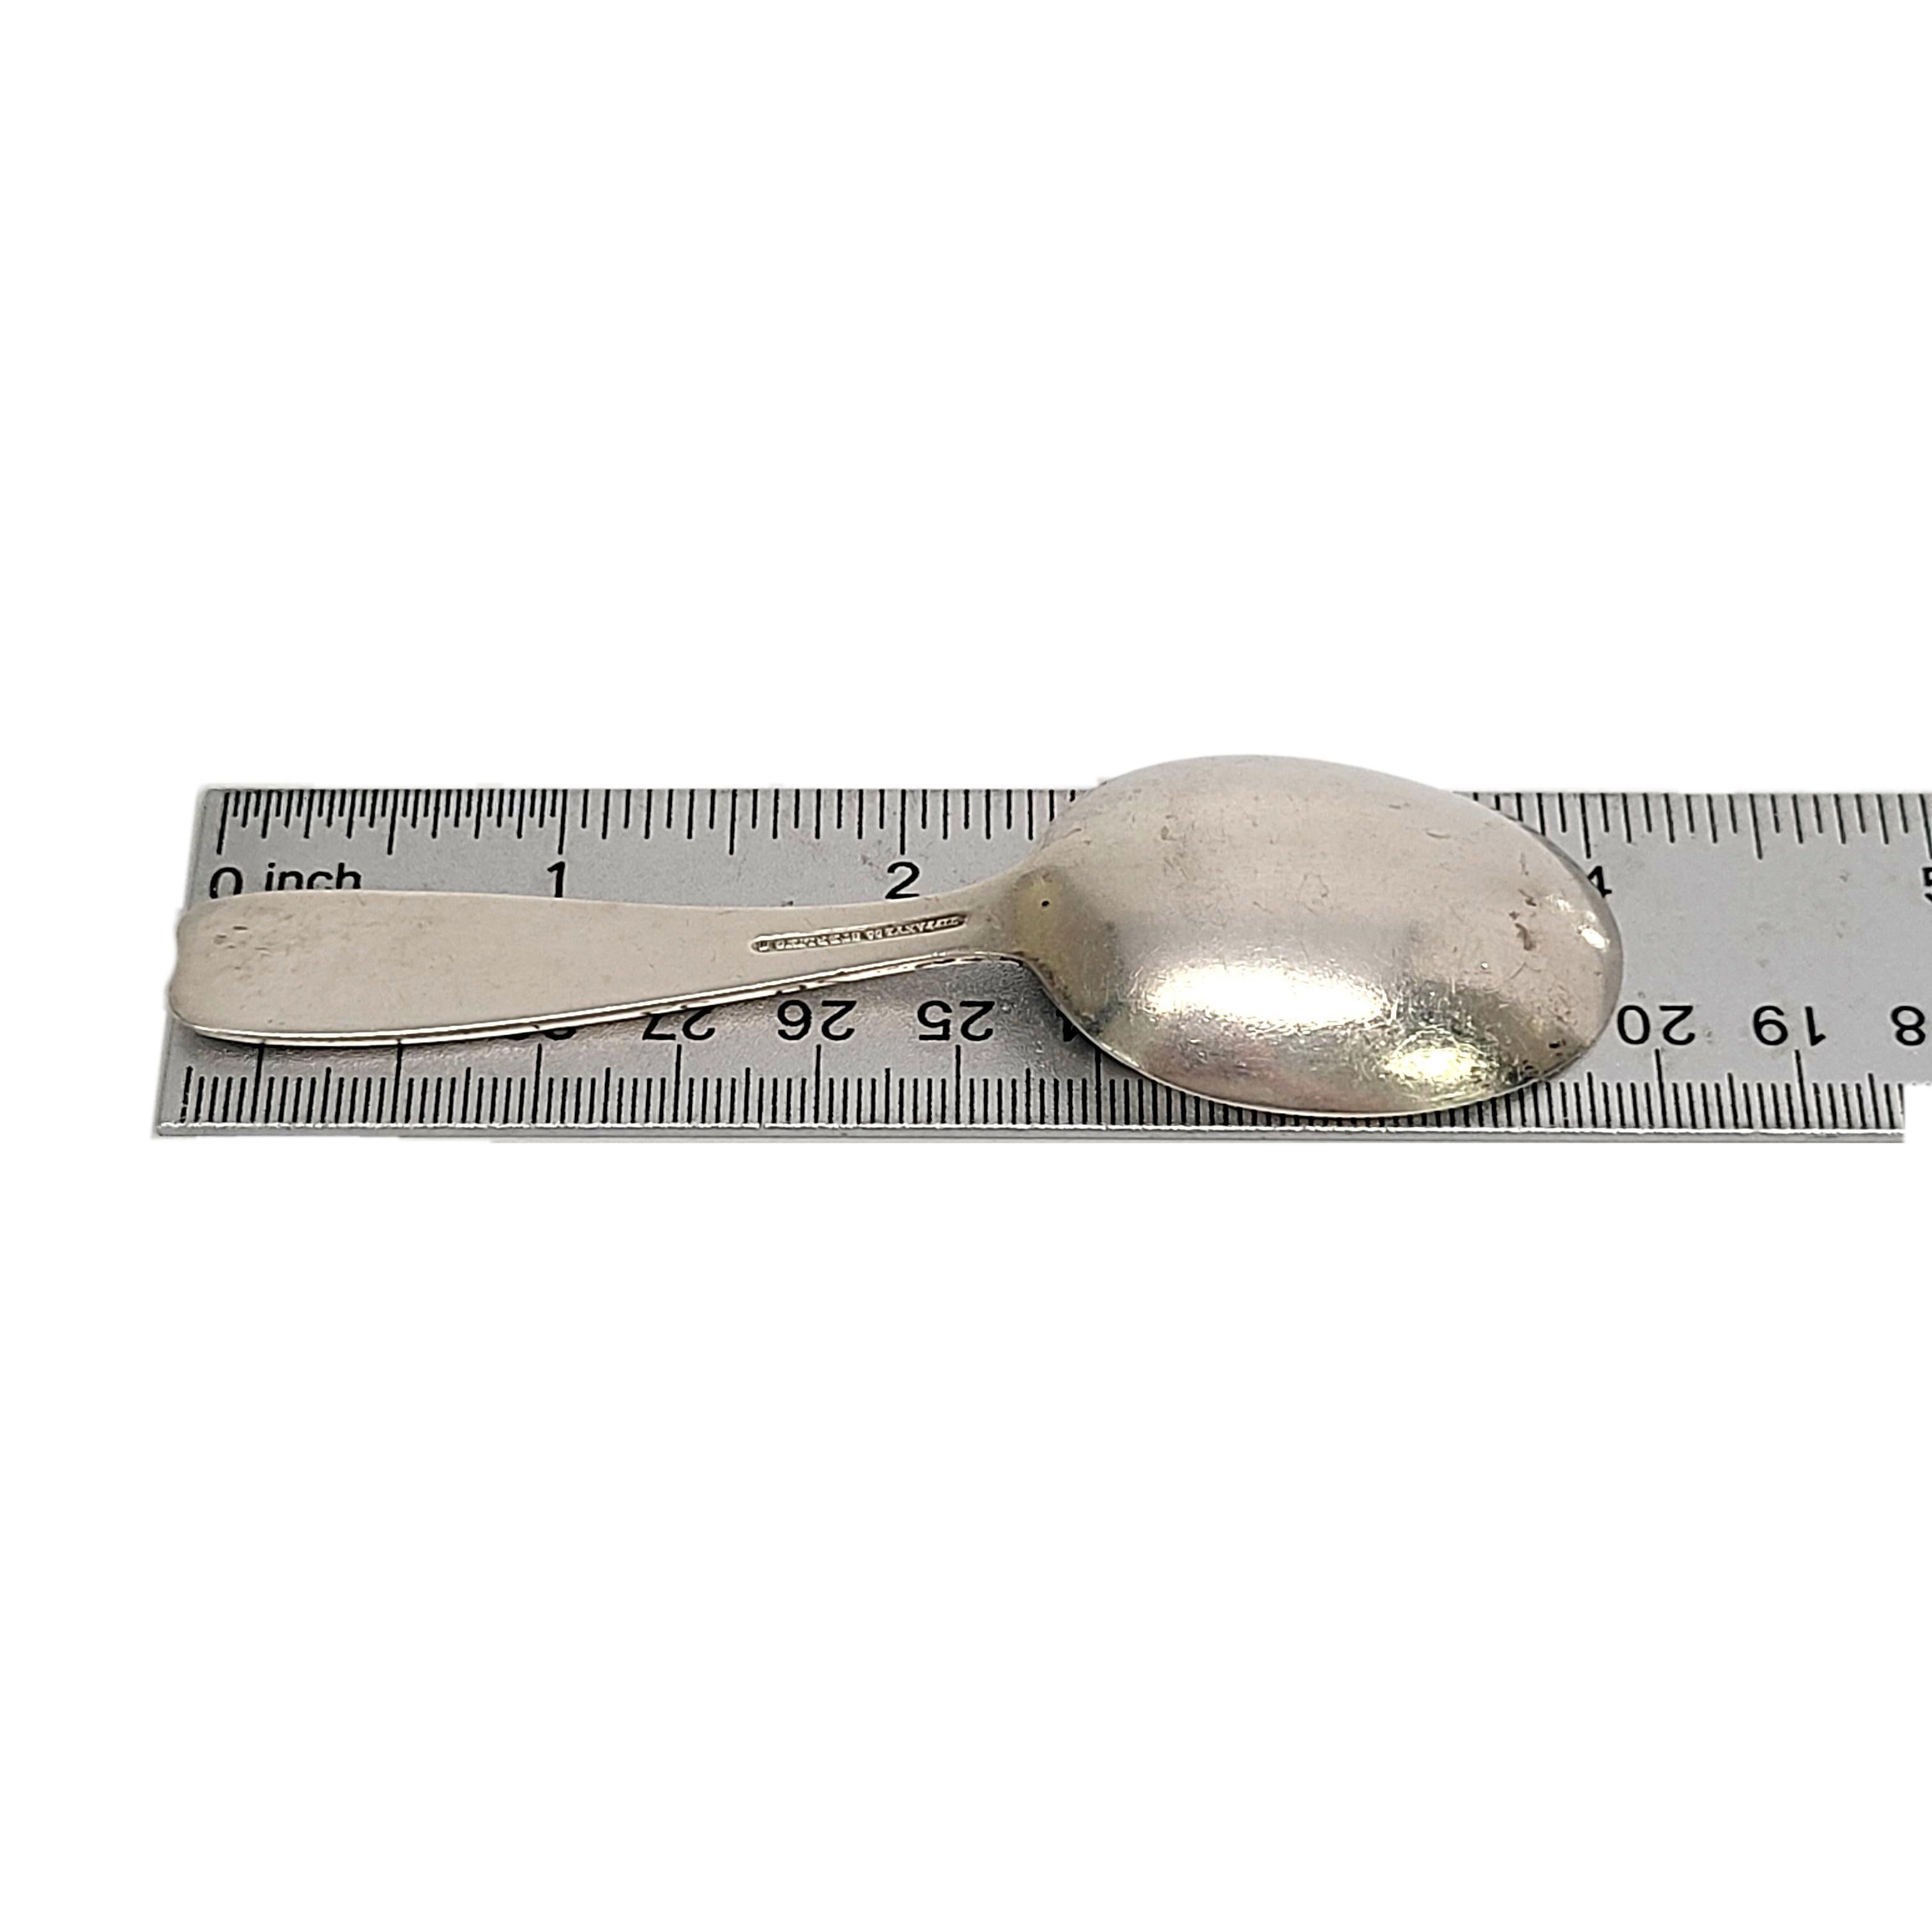 Tiffany & Co Cordis Sterling Silver Baby/Child Spoon 1